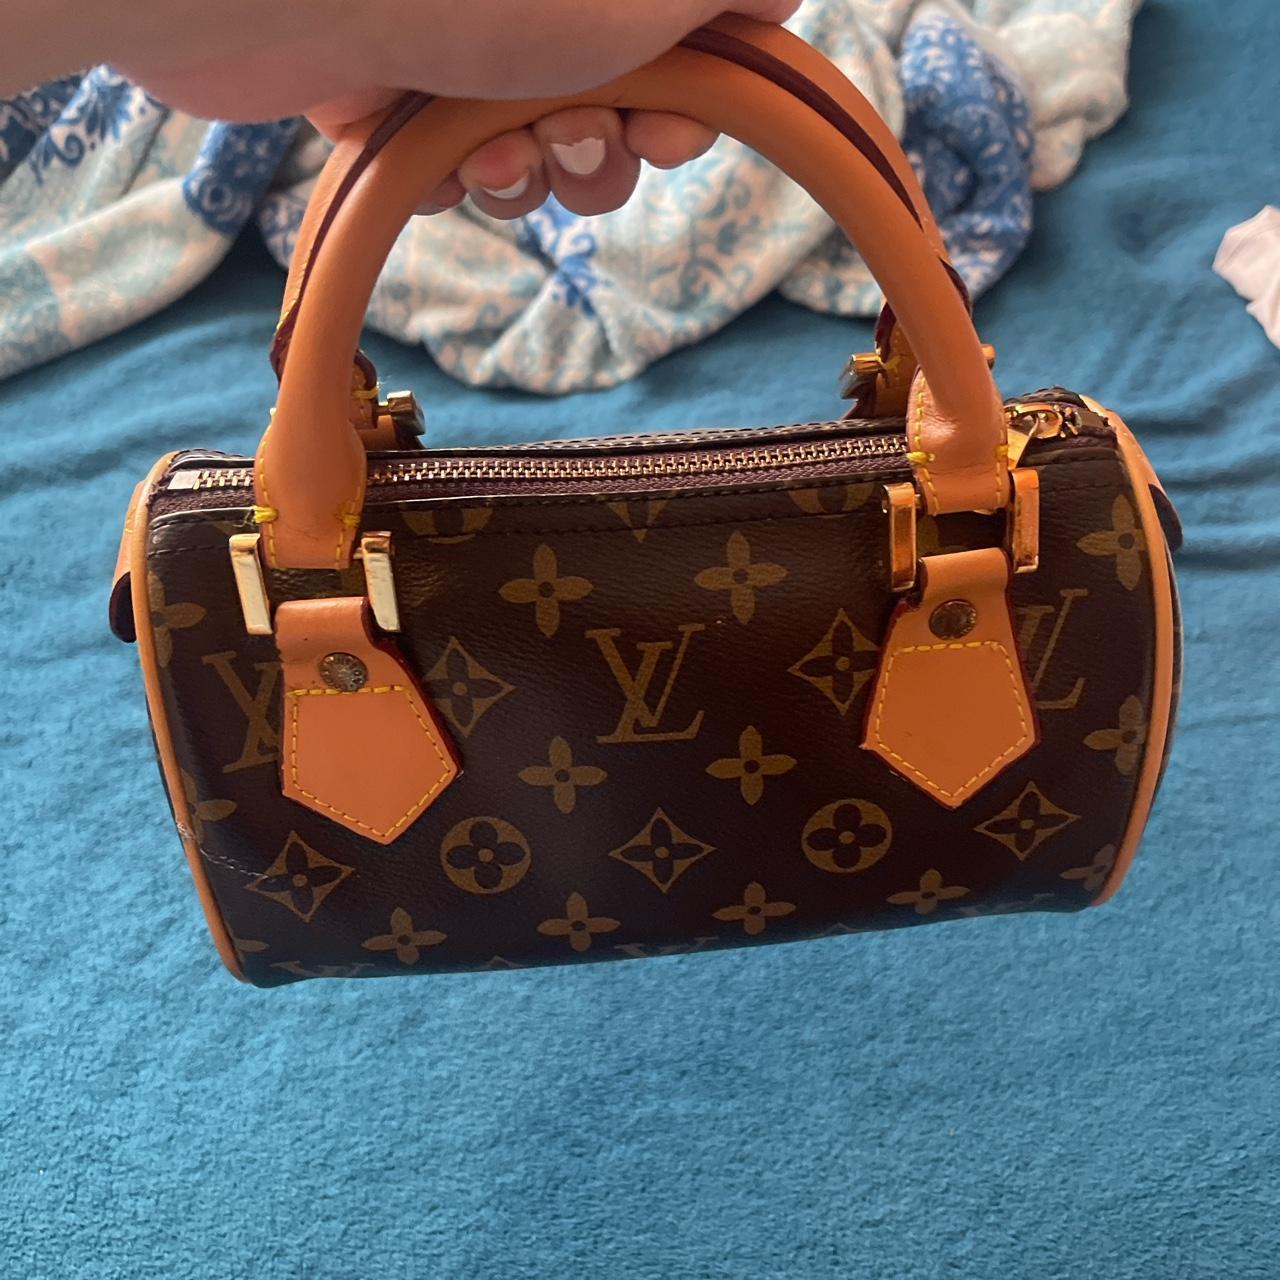 Louis Vuitton Women's Brown and Gold Bag (8)